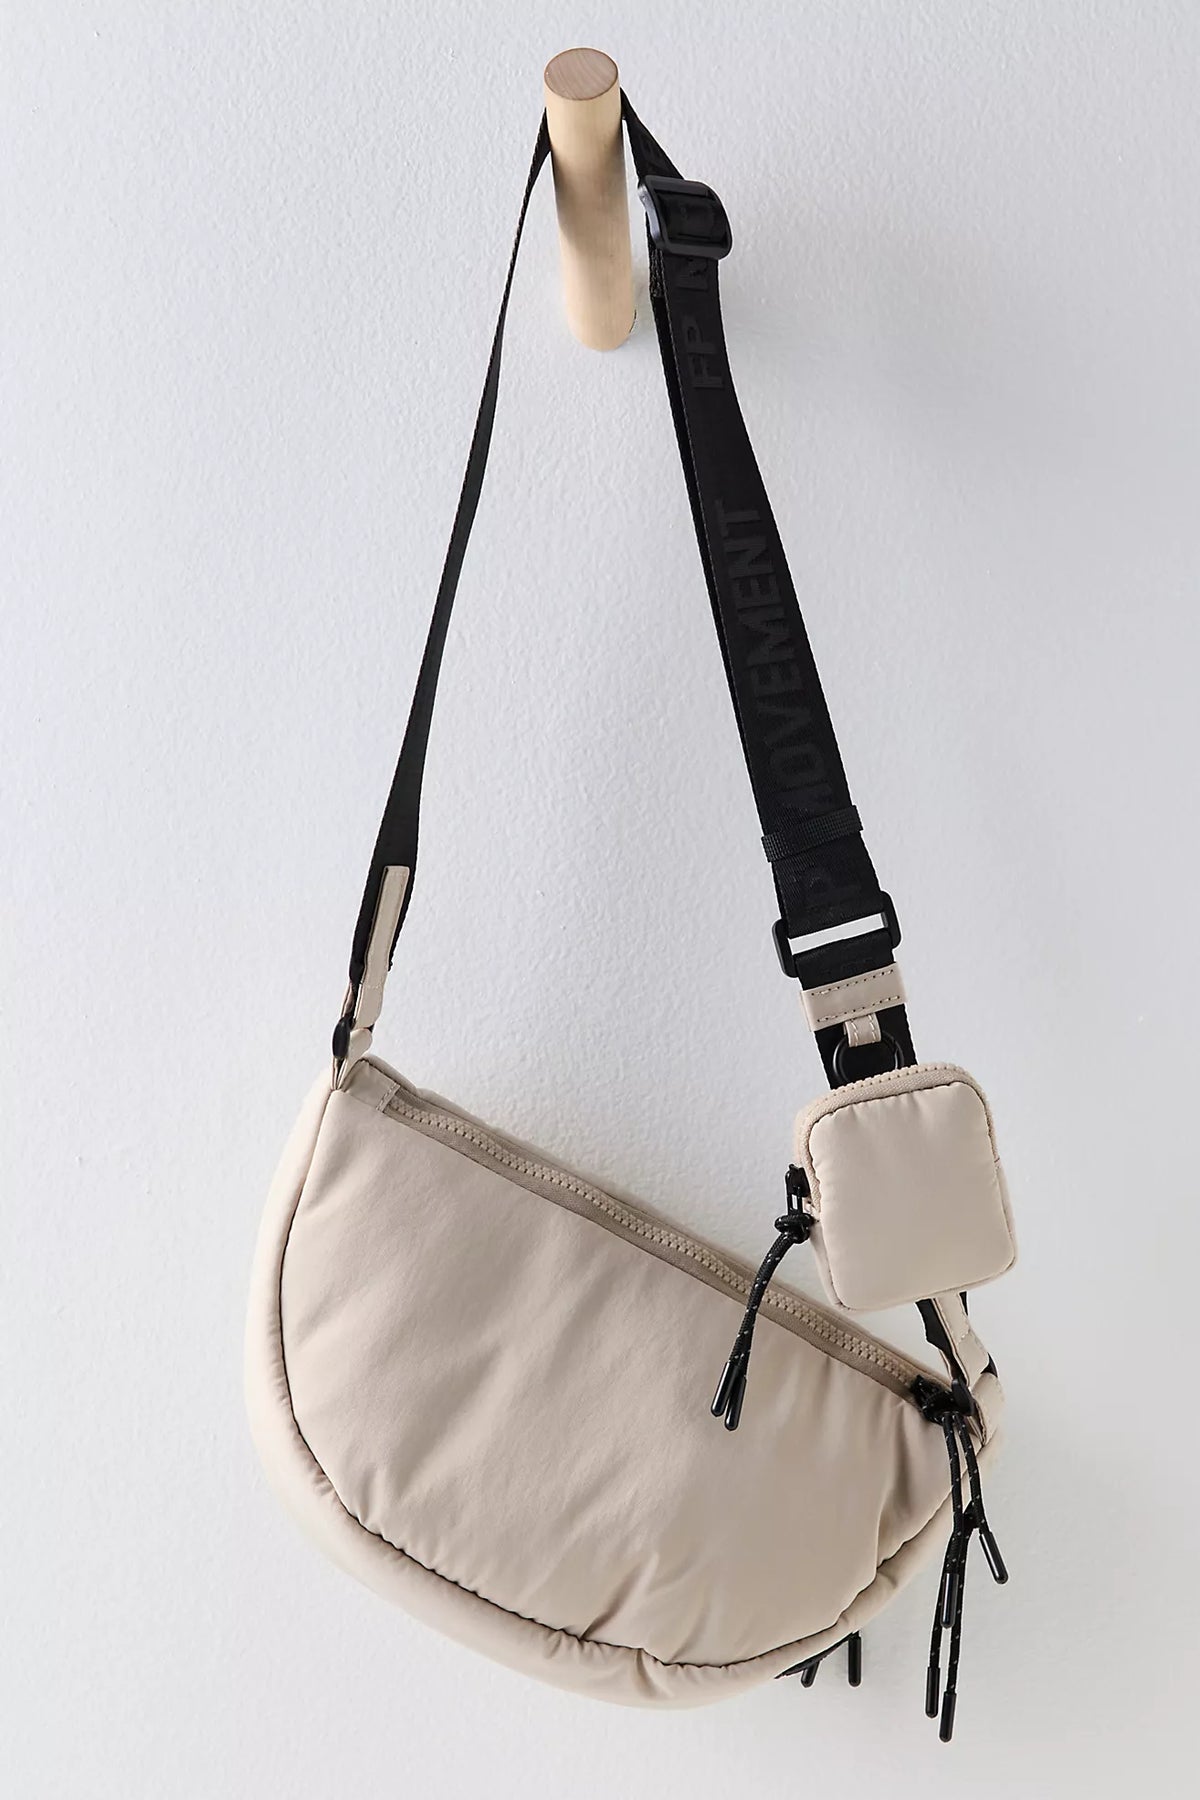 FP Movement Hit The Trails Sling